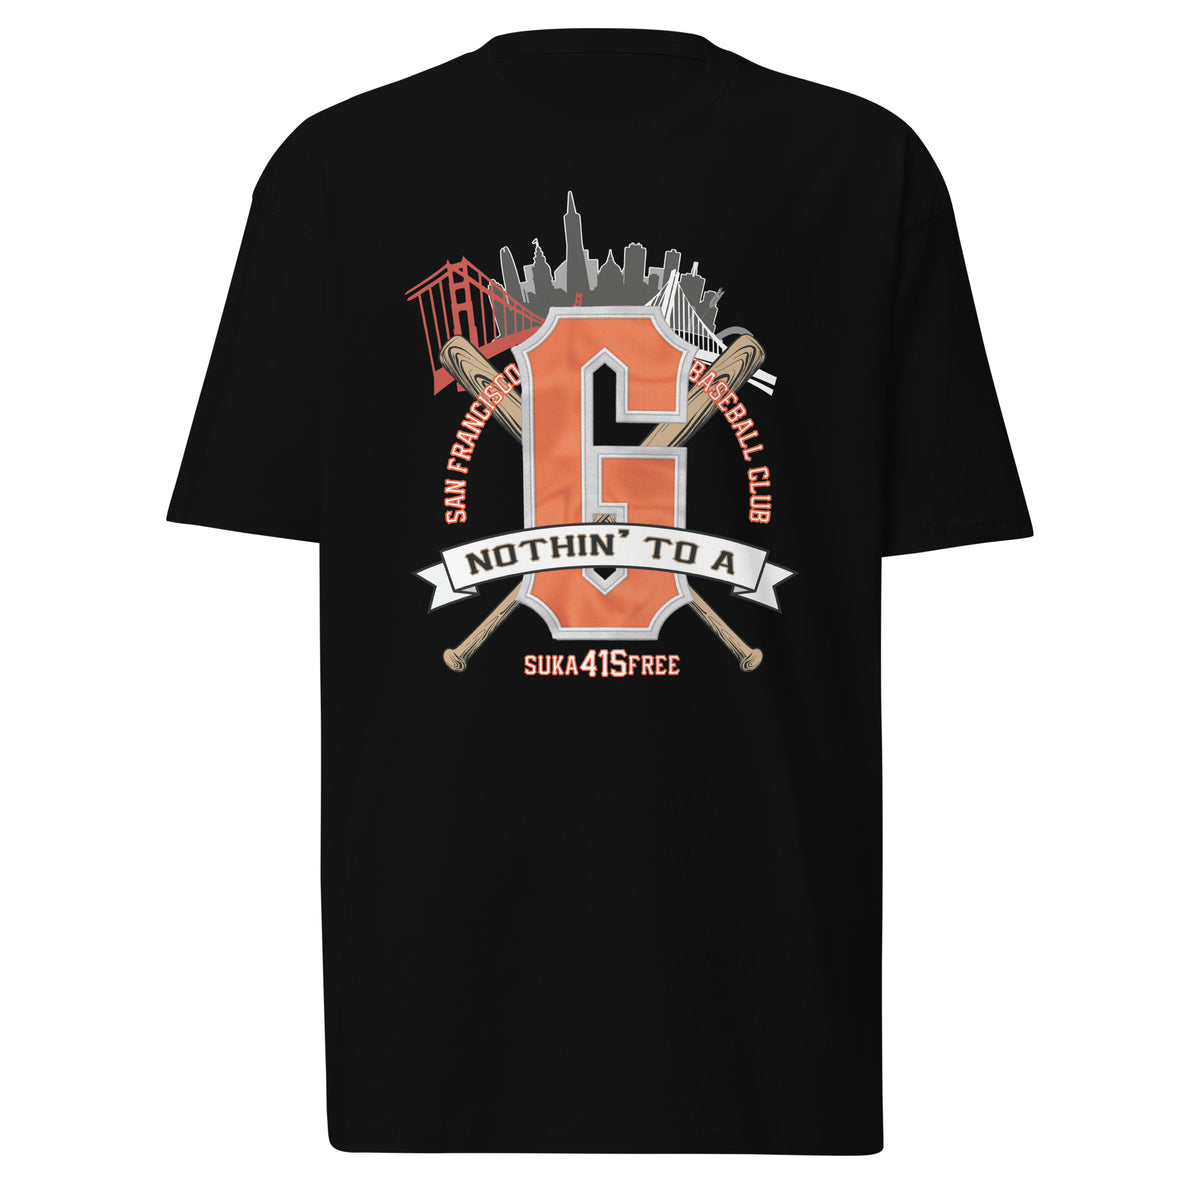 Nothin to a G T-Shirt (SF Giants)